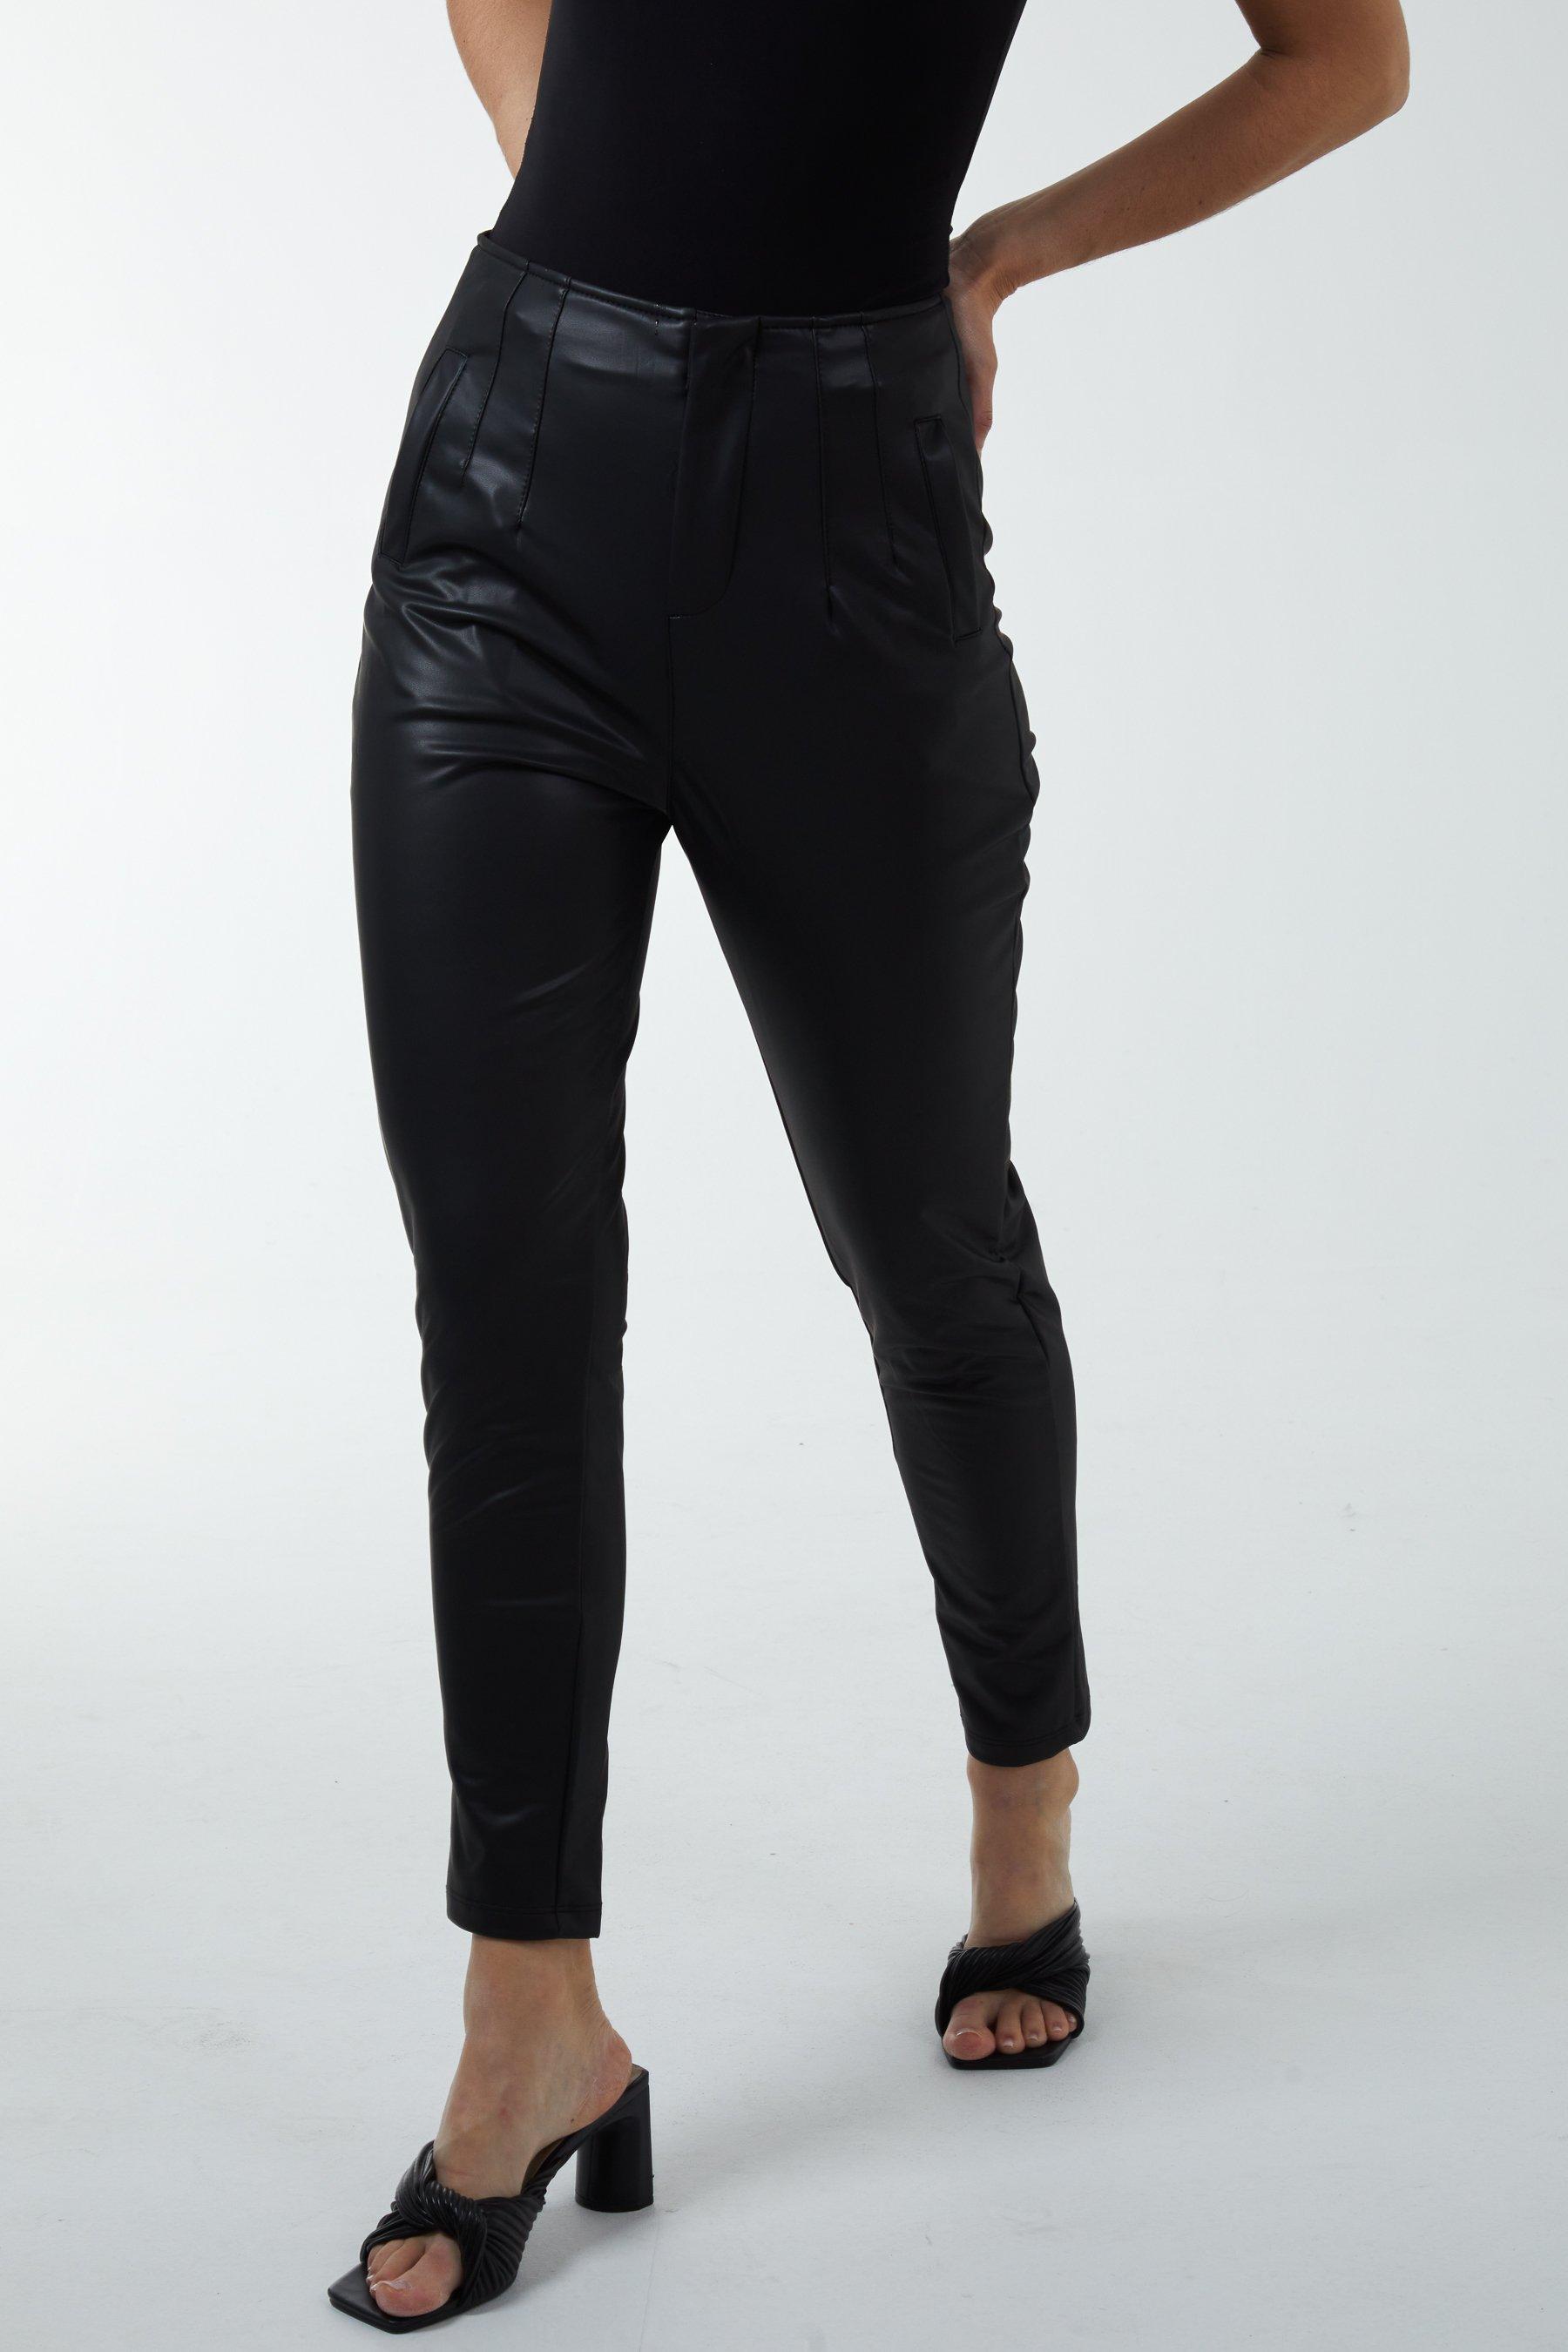 A New Day Women's High-Rise Skinny Ankle Pants - (Rust, 18R) at